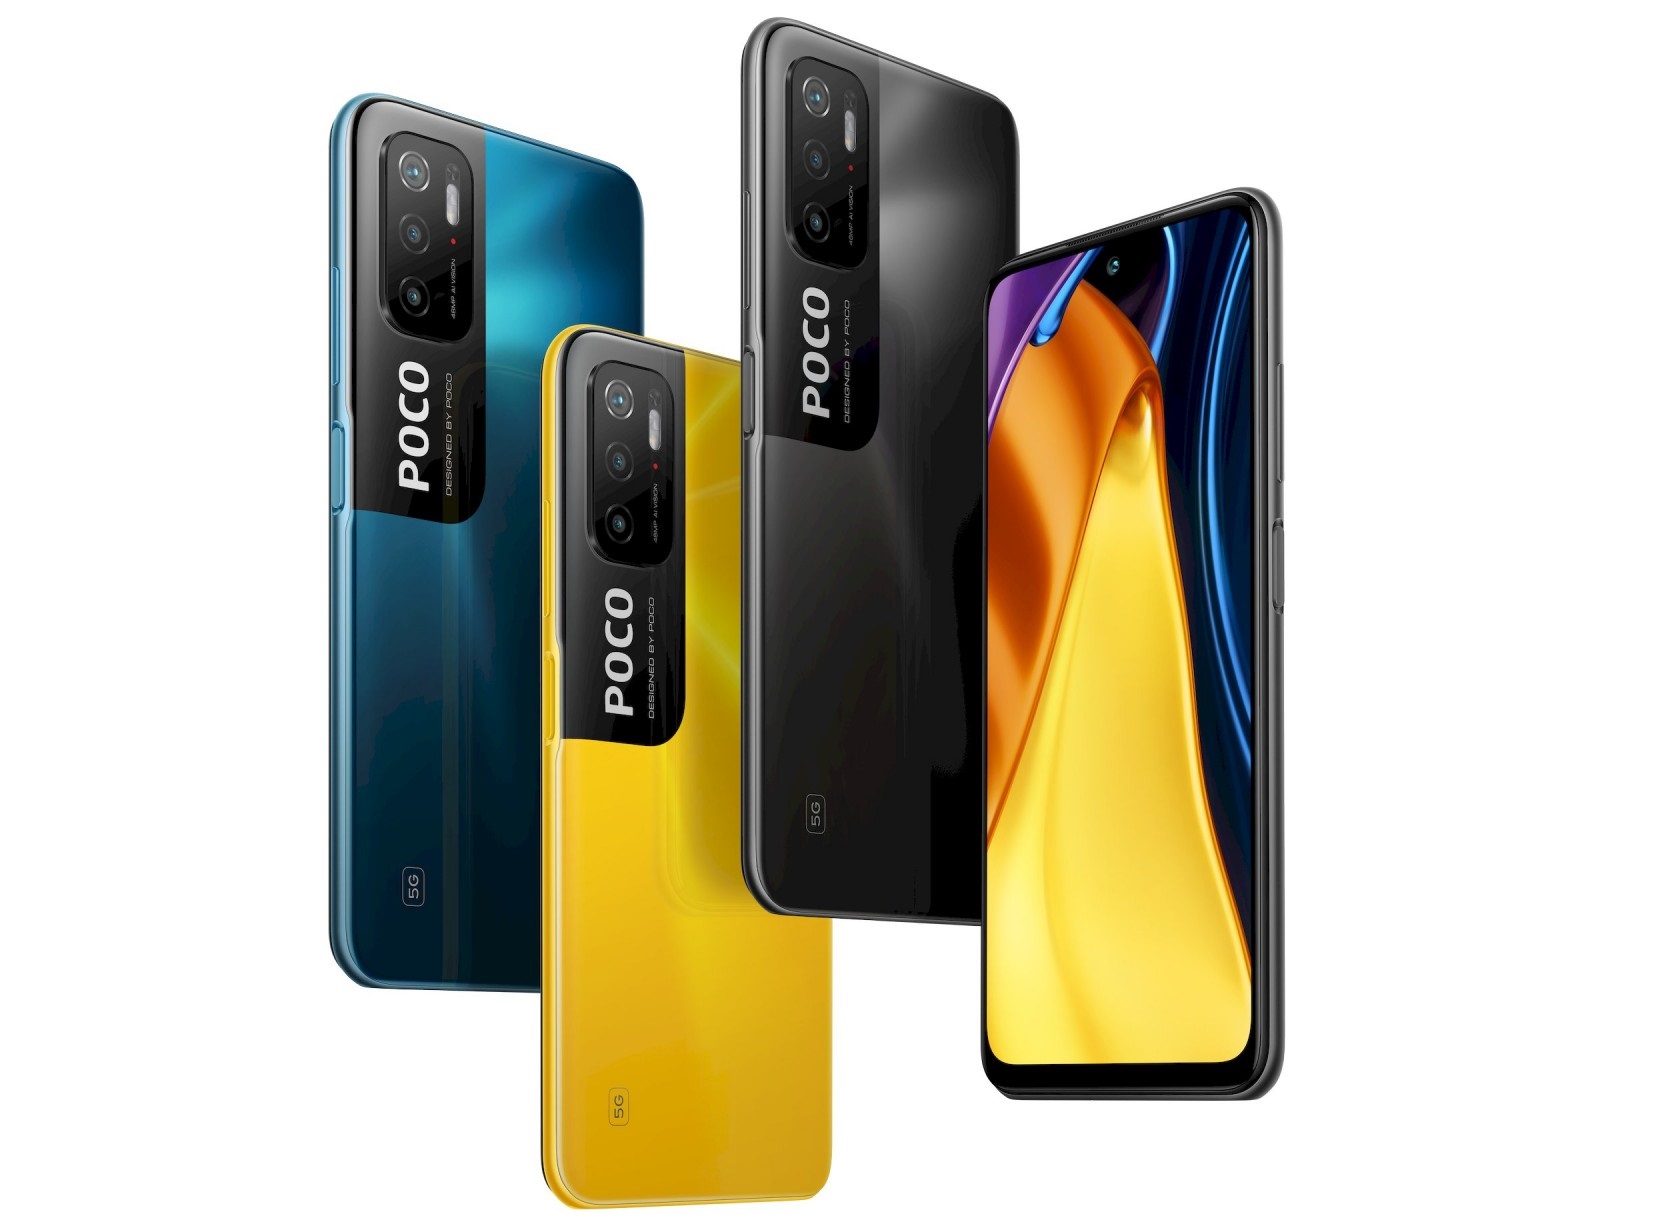 Poco M3 Pro 5G goes official with Dimensity 700 SoC with 90Hz display